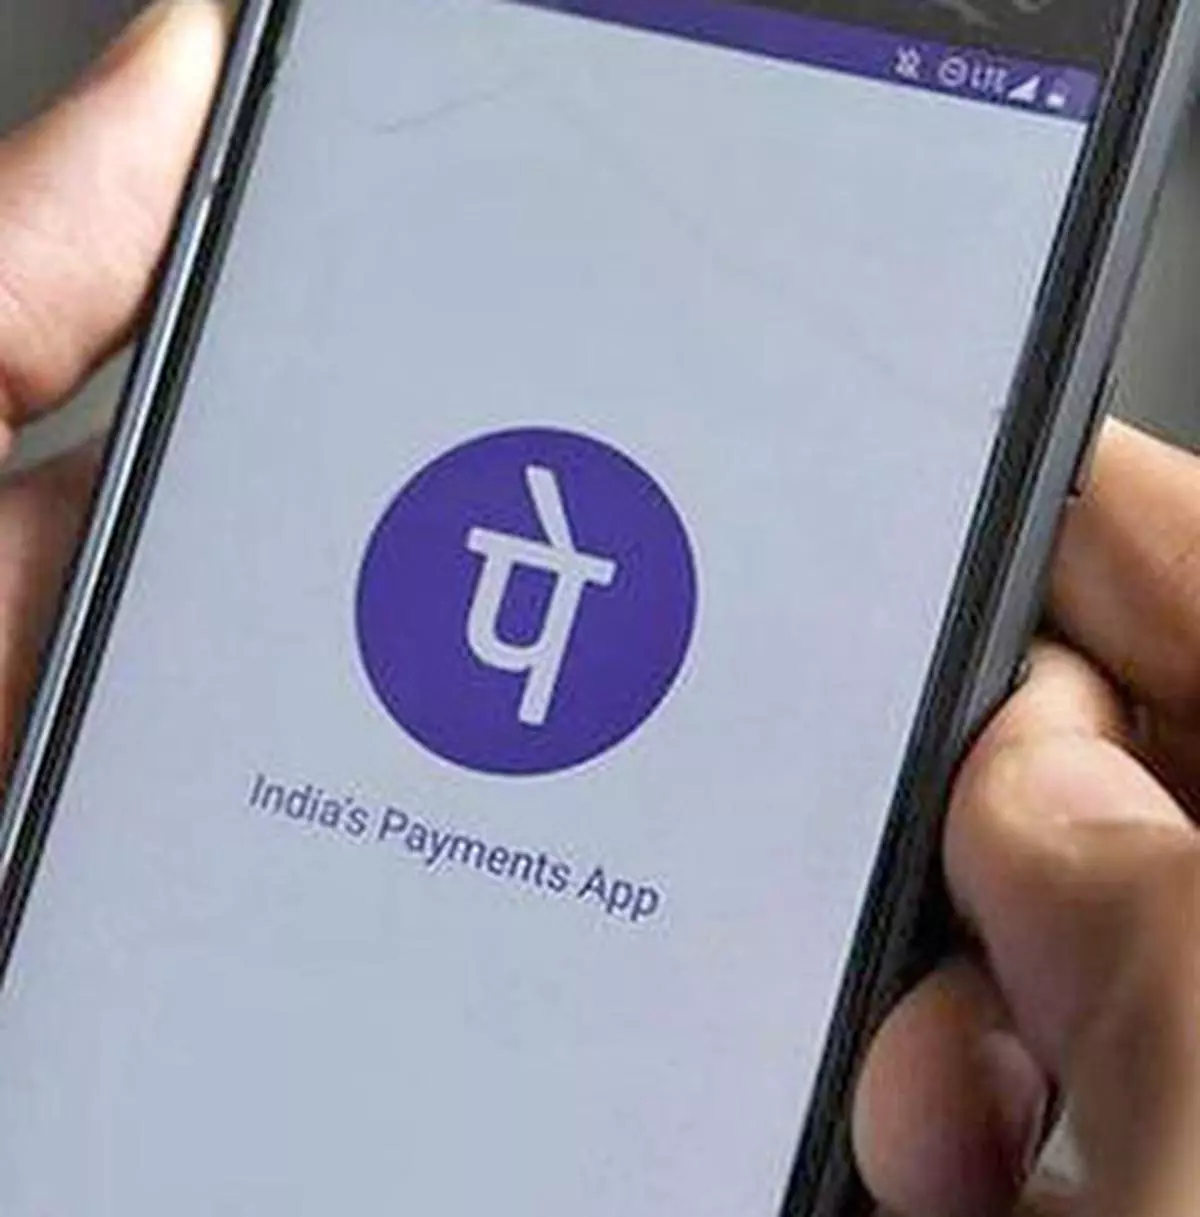 PhonePe Logo and symbol, meaning, history, PNG, brand